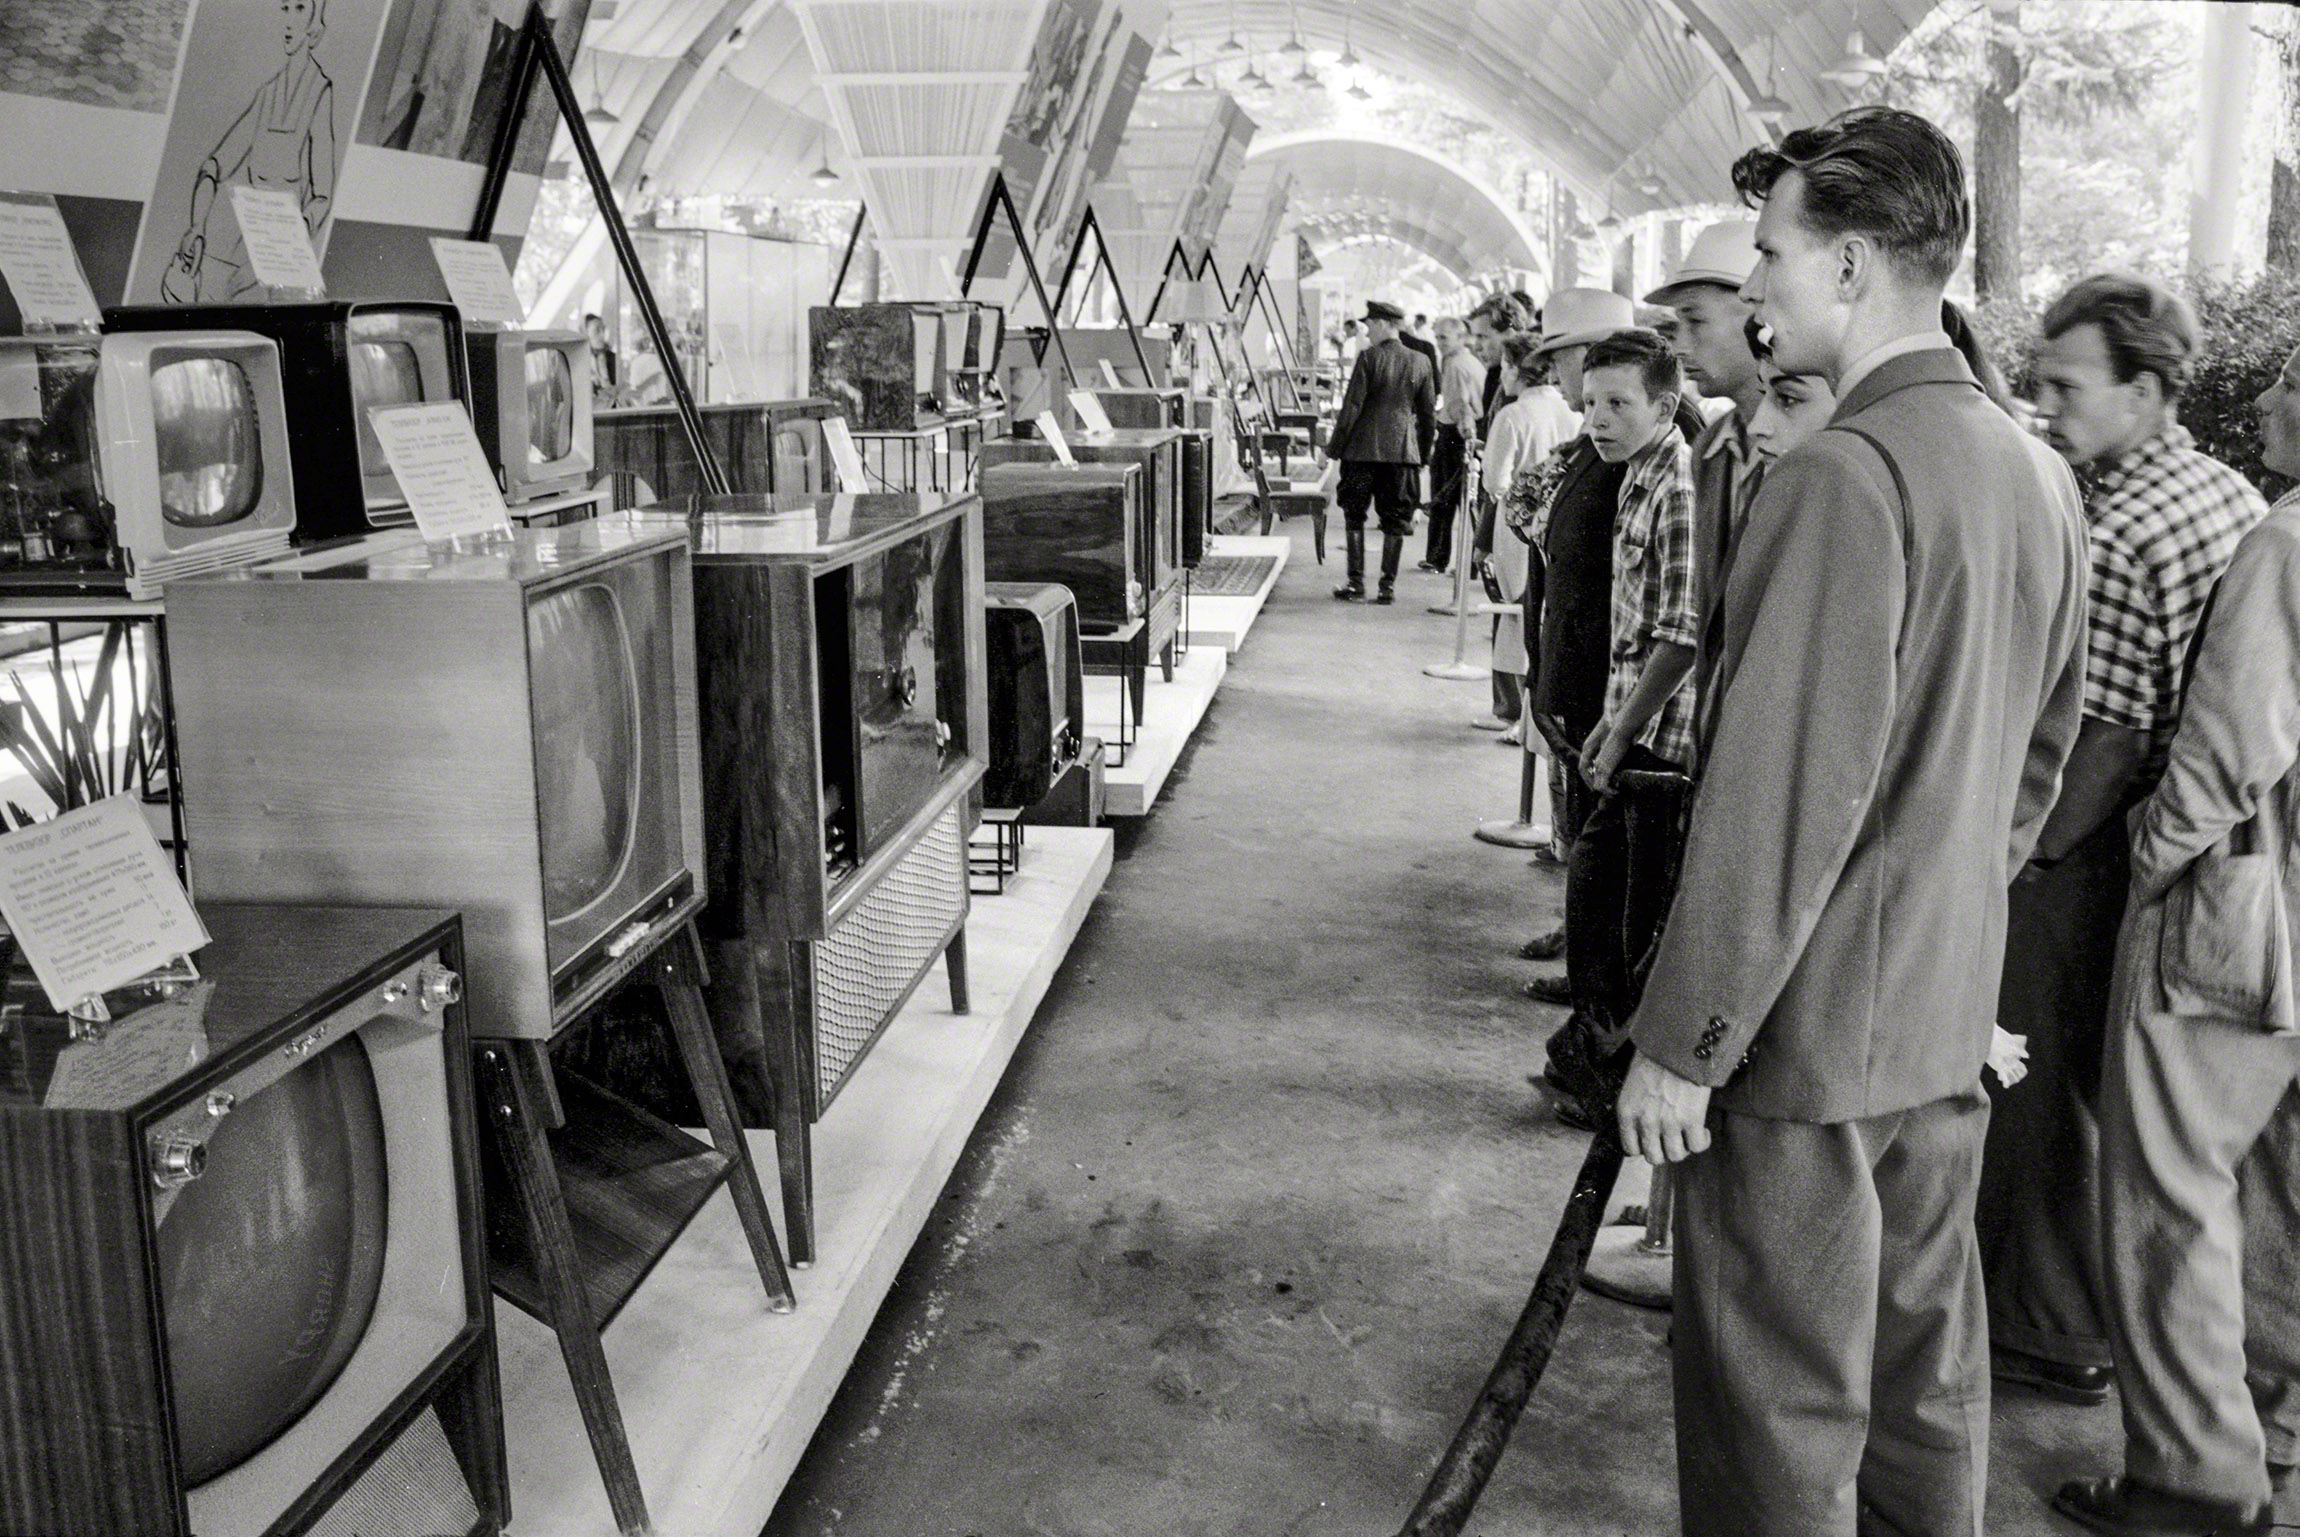 August 5, 1959. "Russians looking at television sets and radios at the USSR Exhibition in Sokolniki Park, Moscow, next to the American National Exhibition." U.S. News & World Report Magazine Photograph Collection. View full size.